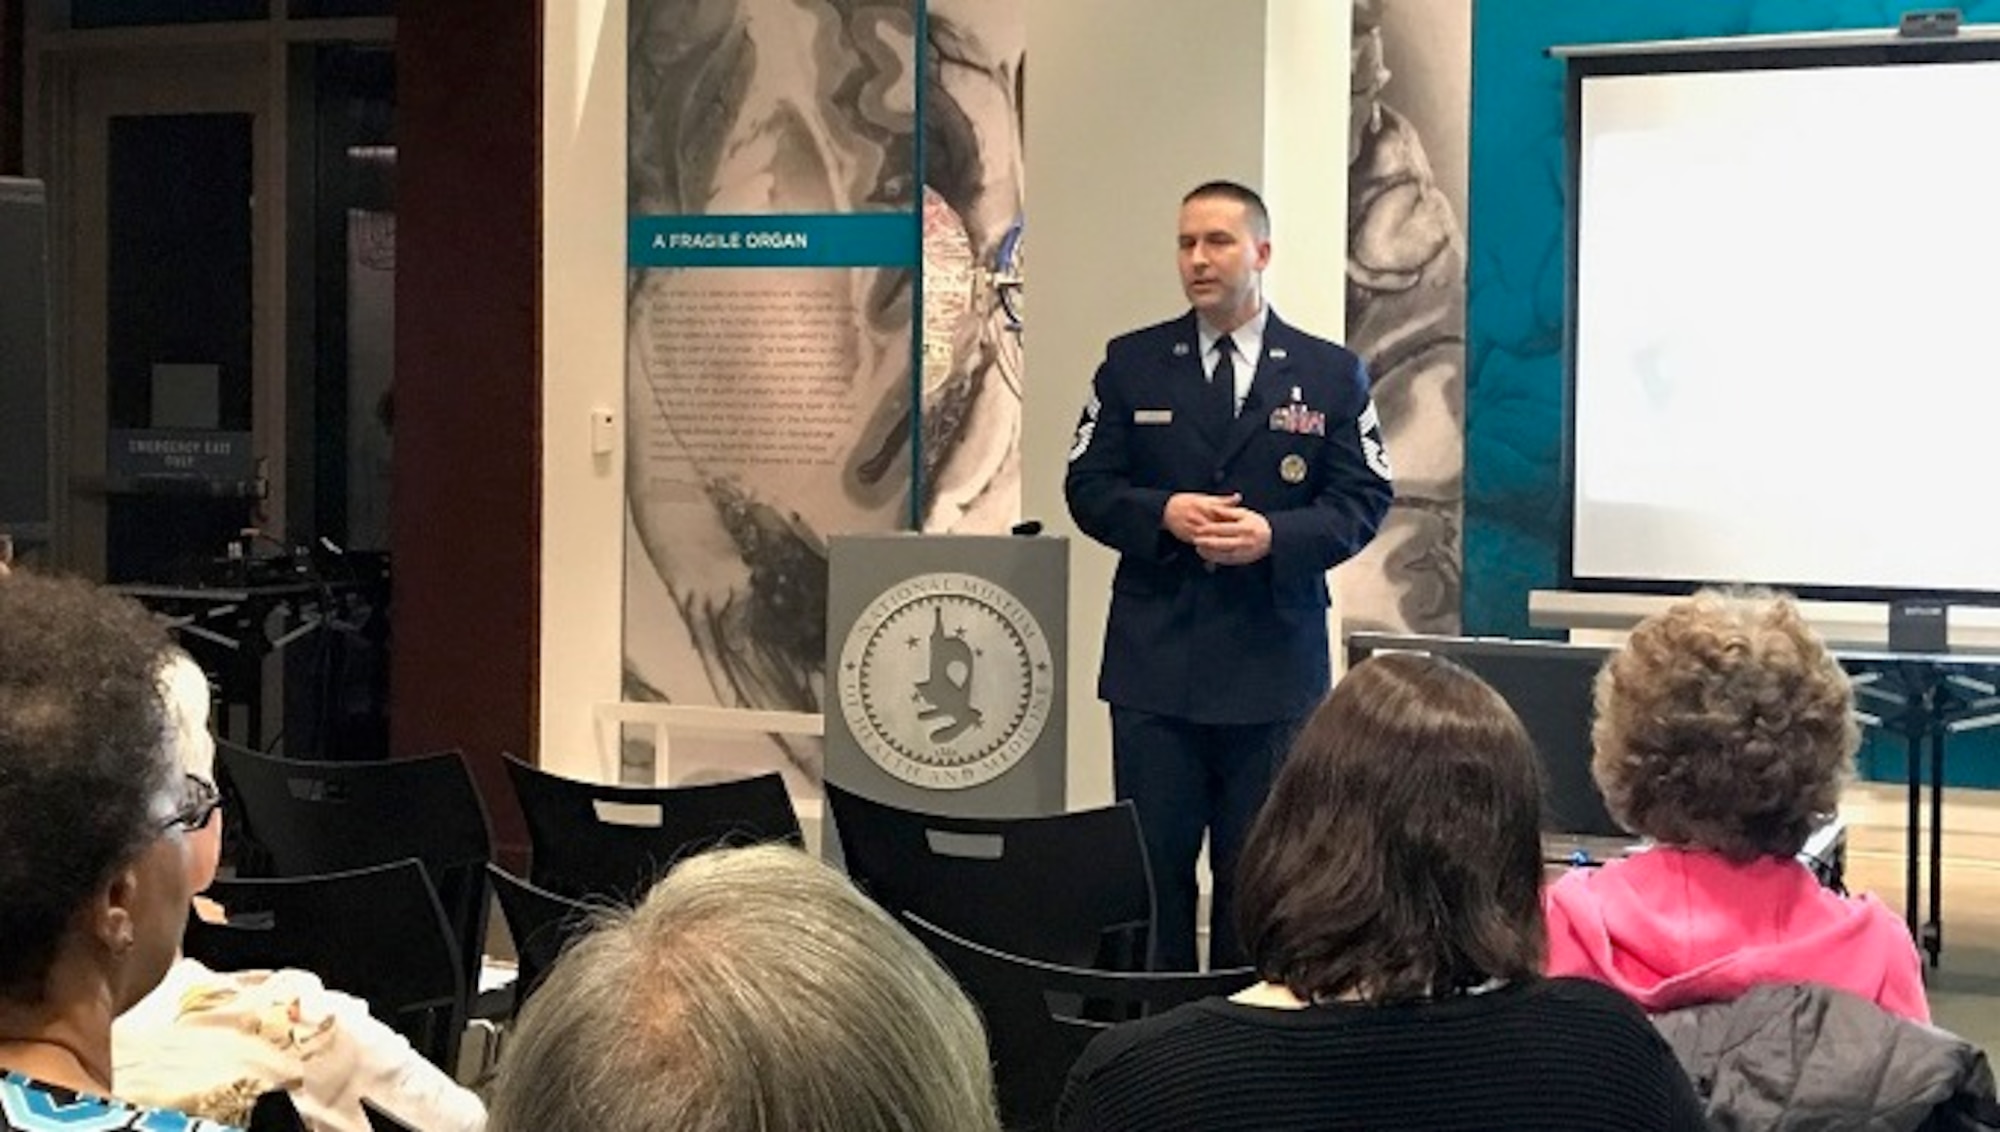 Chief Master Sergeant David J. Little, Chief, Medical Operations and Research, Office of the Air Force Surgeon General, speaks during the Feb. 2017 Medical Museum Science Café at the National Museum of Health and Medicine, on Tues., Feb. 28, 2017. Little's program was titled "Air Force Medical Service: Building Competent, Capable Enlisted Airmen."